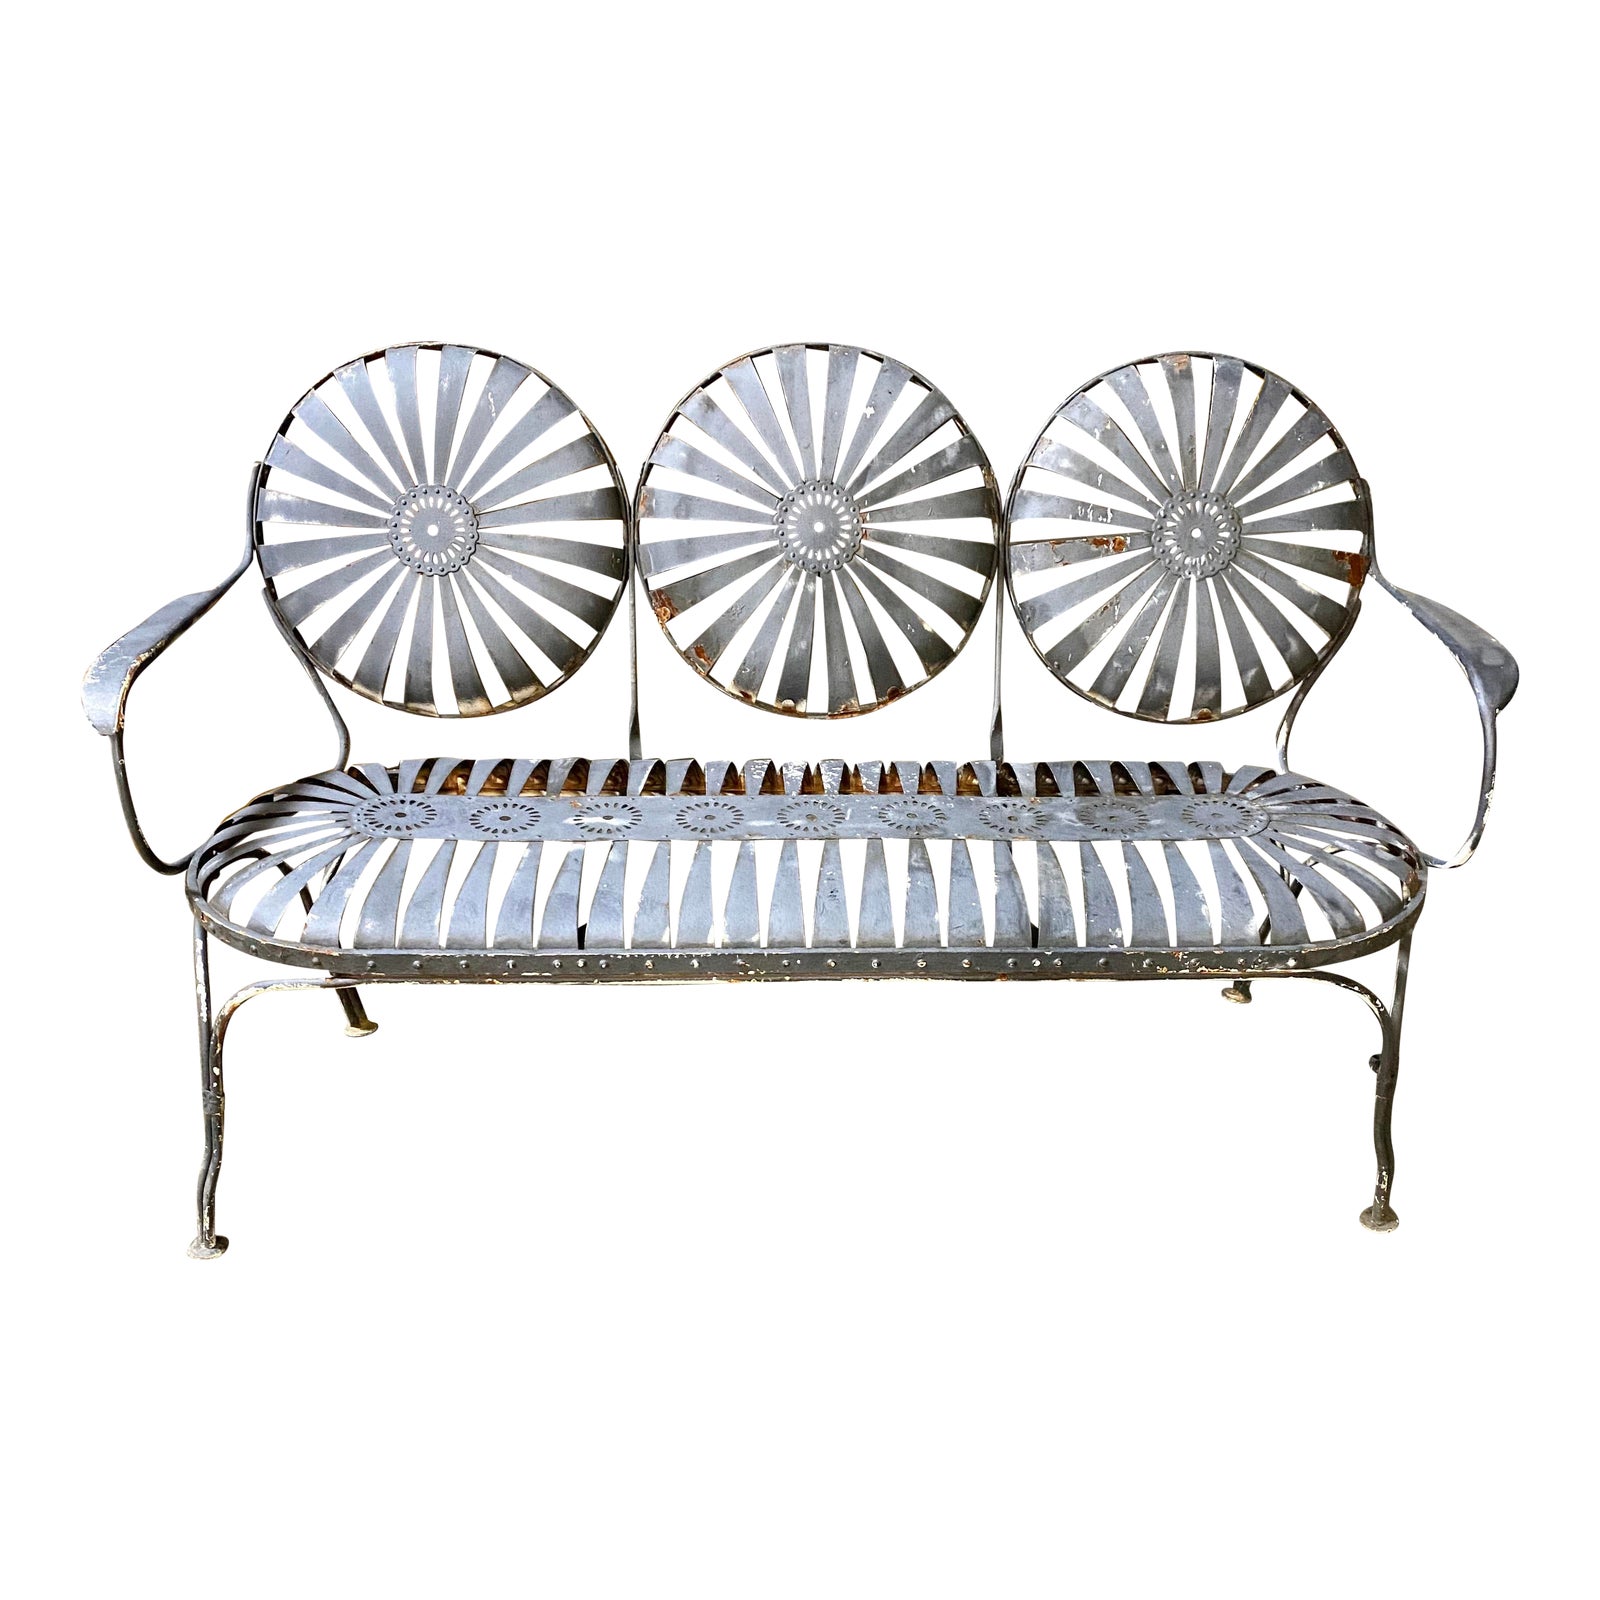 20th Century French Three-Seater Starburst Garden Metal Bench by Francois Carre